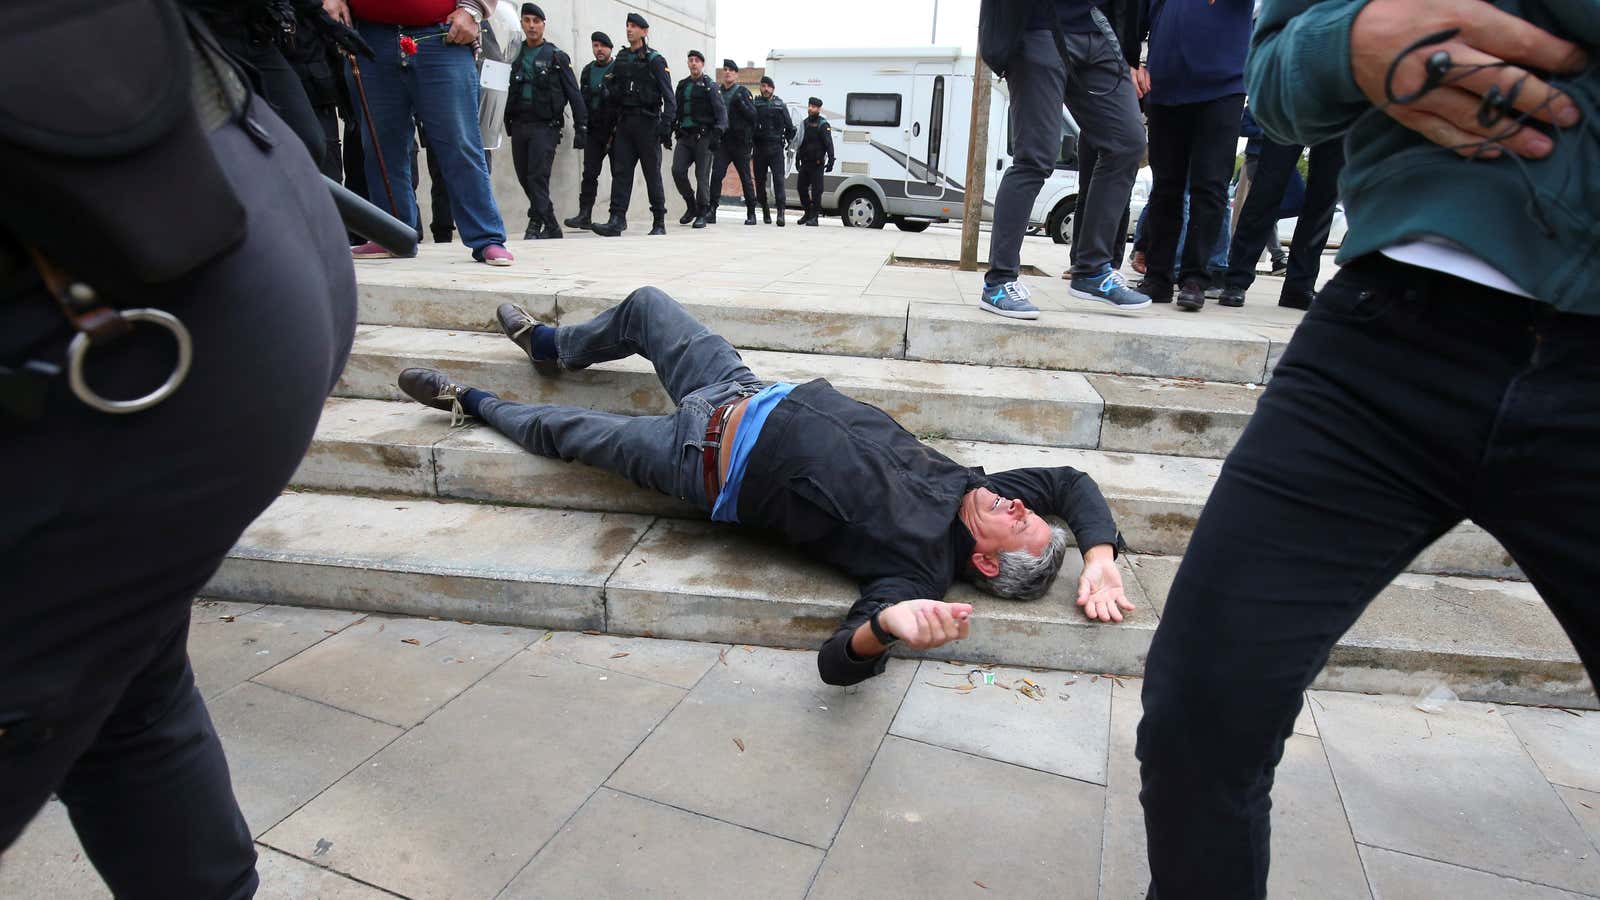 A man falls to the ground during scuffles with Spanish police.